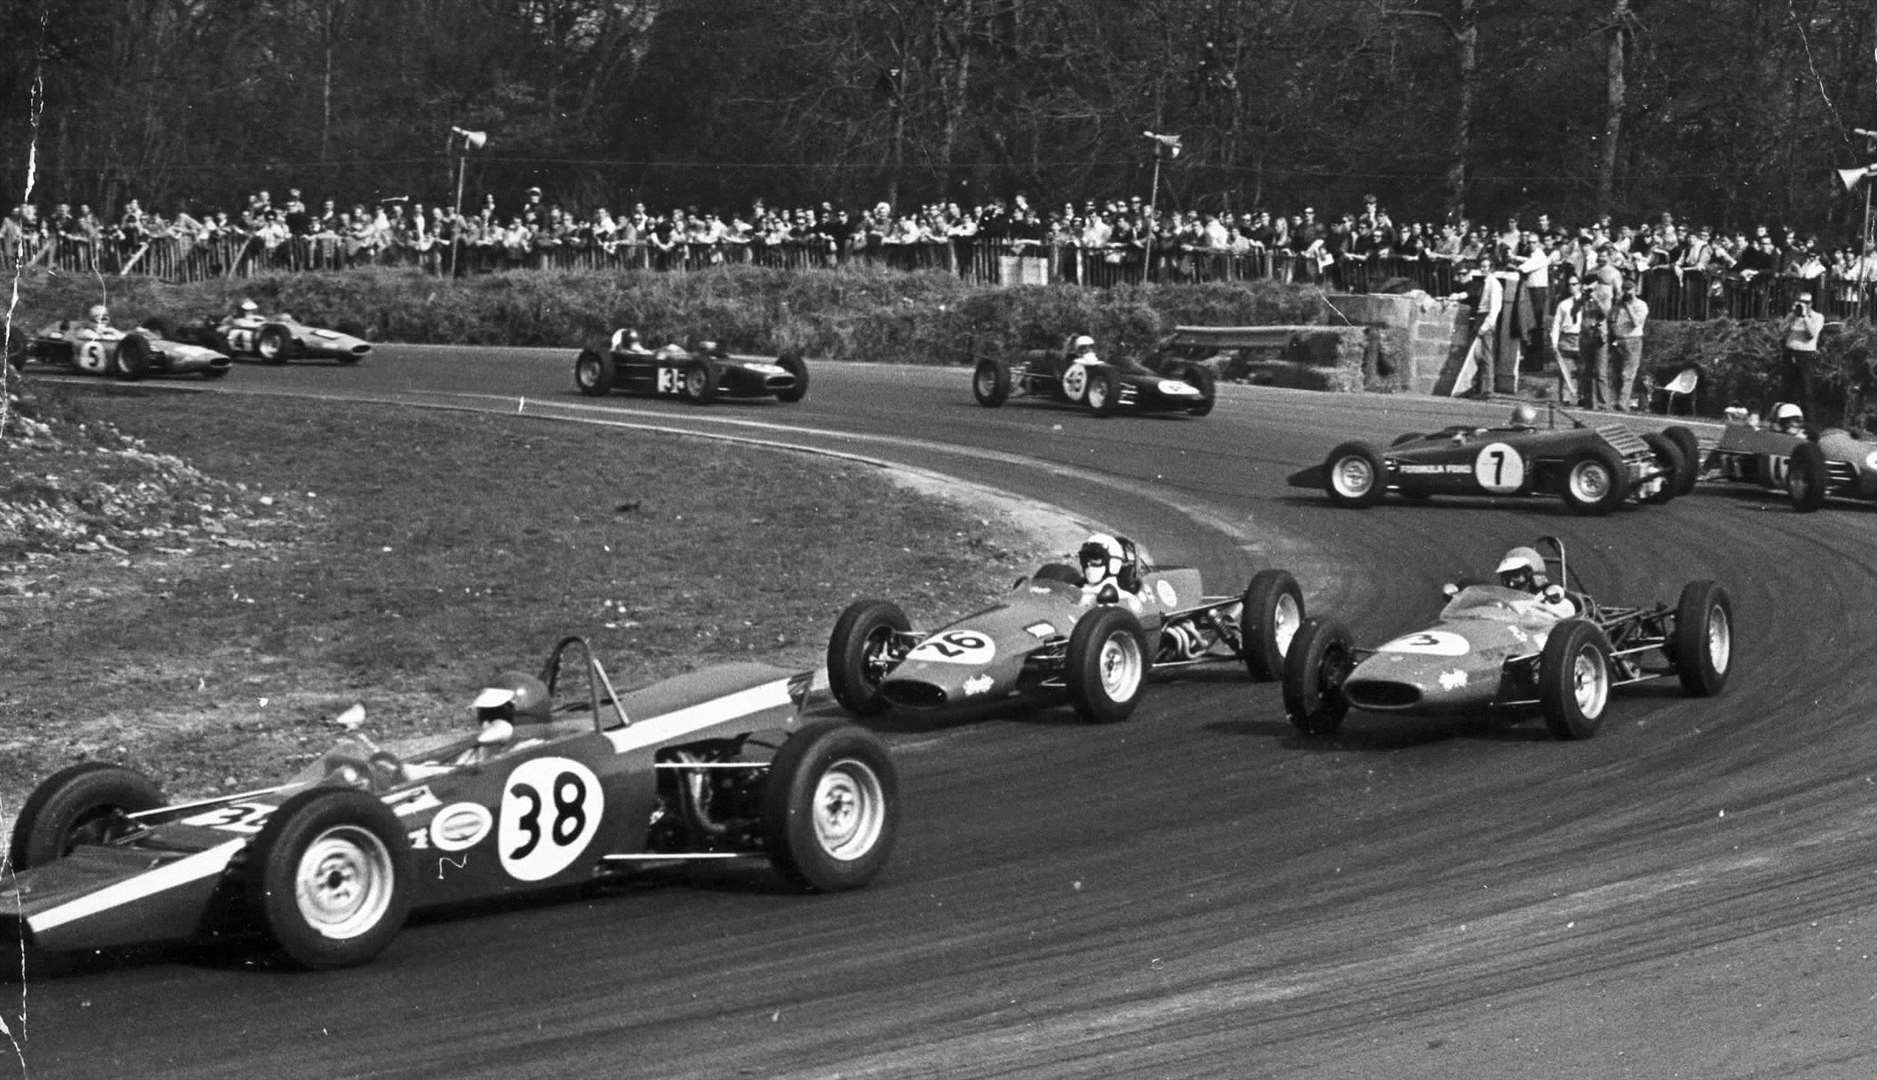 Druids is one of the best spectator spots at Brands - and this shot from 1964 shows one single-seater driver getting it wrong